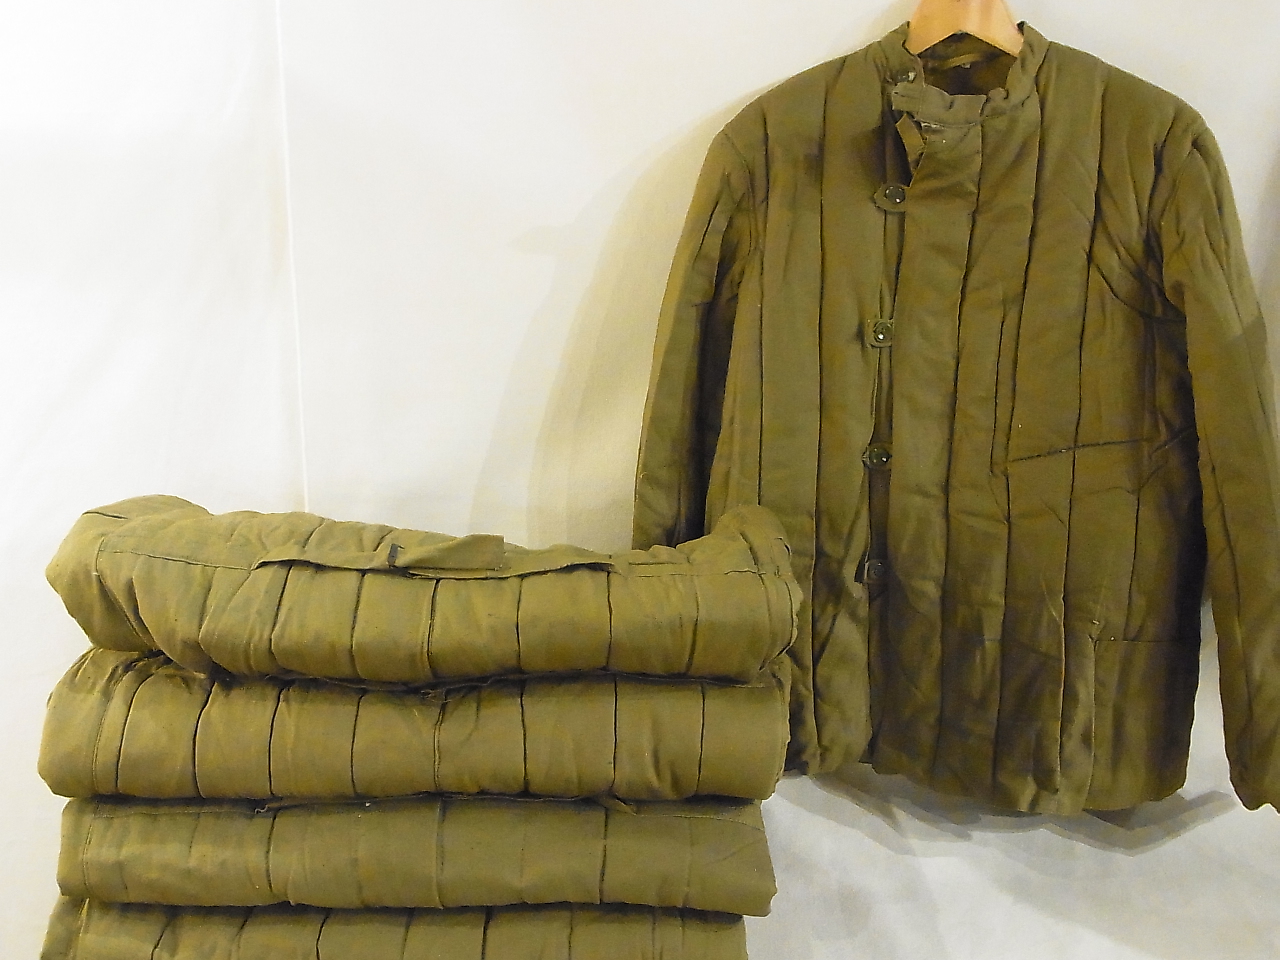 russianmilitary-quiltedjacket-20200103-1